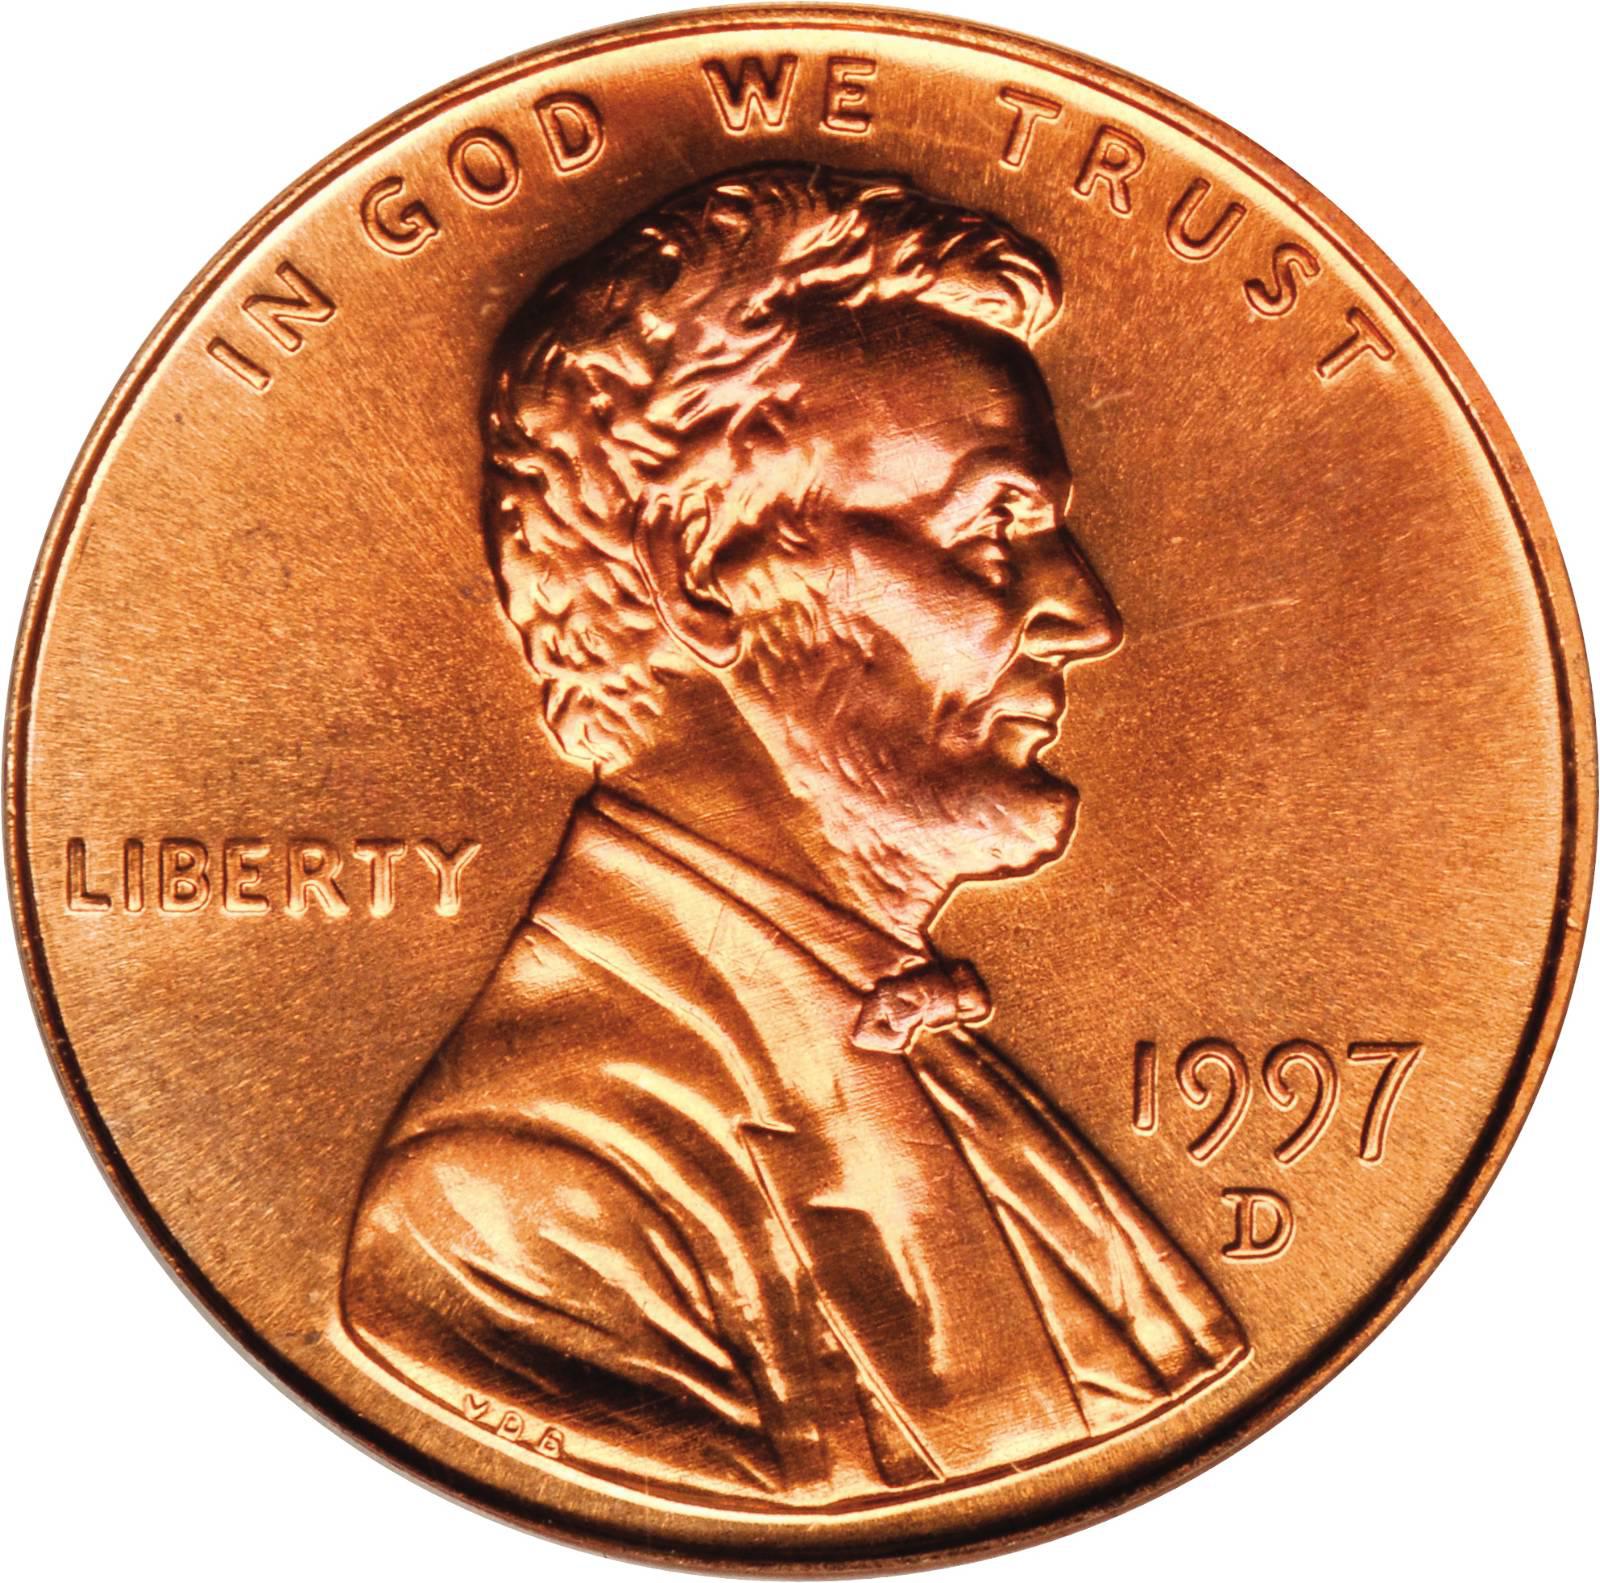 Details about   1997 Lincoln Memorial Cent  D Uncirculated BU 